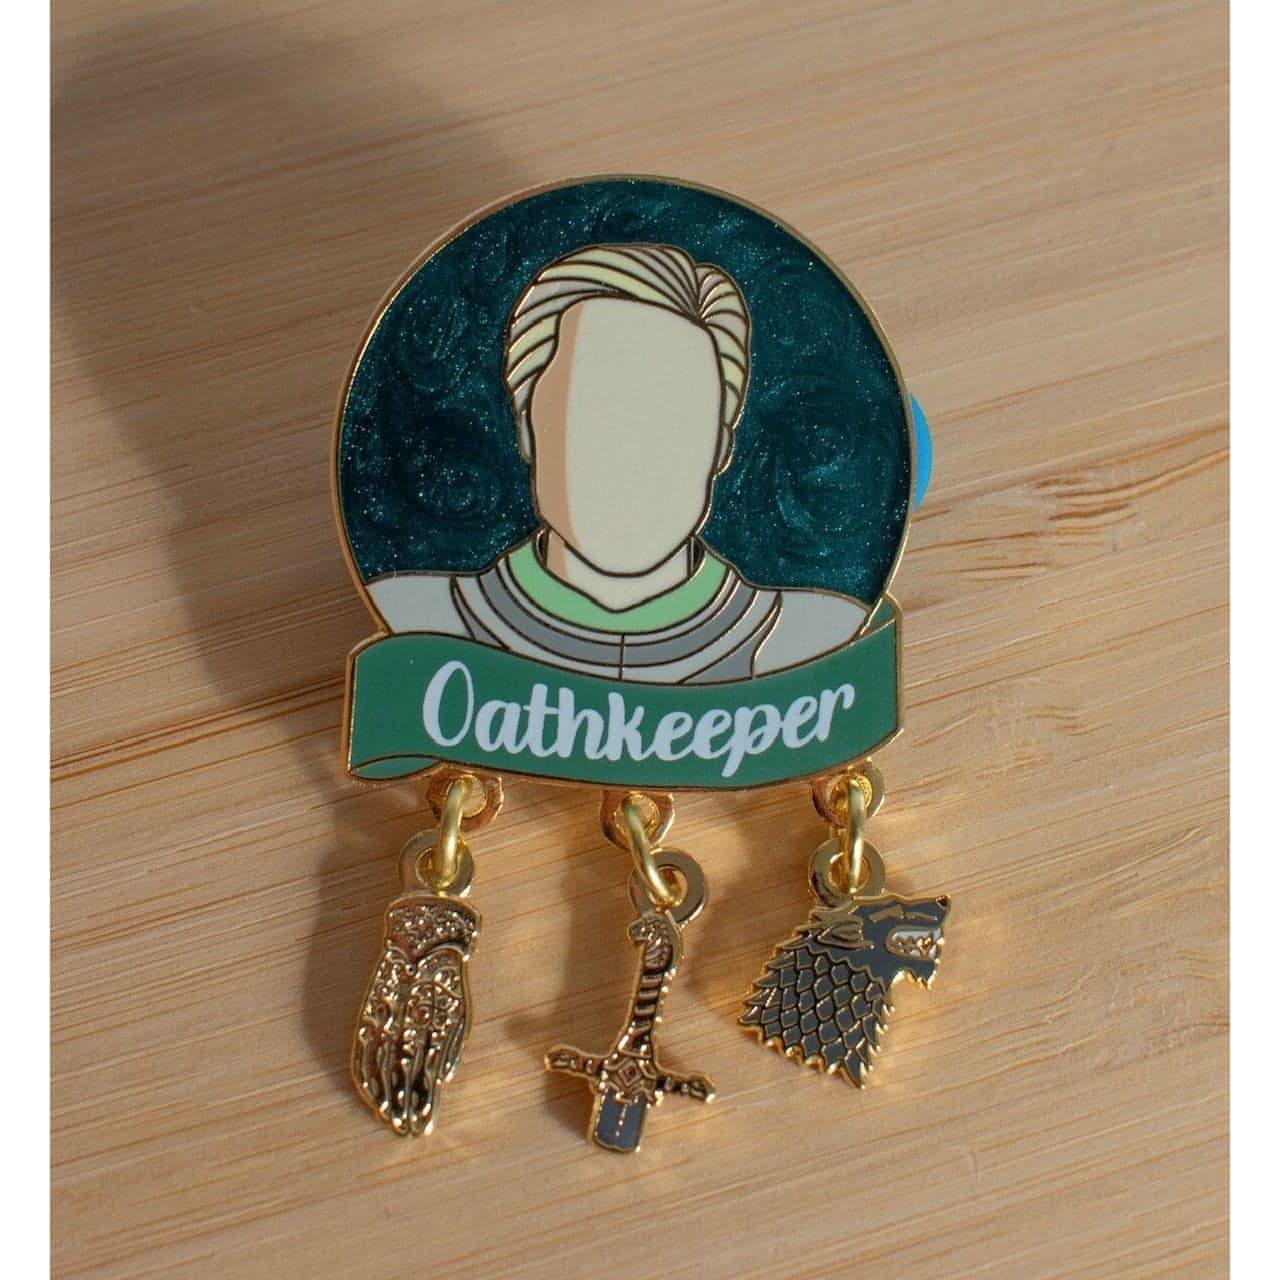 The photo shows a round pin with a dark blue pearl swirl background which is shimmery. The character Brienne is pictured in the centre of the circle in her Game of Thrones armour. Below is a green banner with the quote "Oathkeeper" in white screenprint. Below that are three charms which dangle by one ring. The charms are Jaime's golden hand, the hilt of her sword, and the Stark wolf sigil.